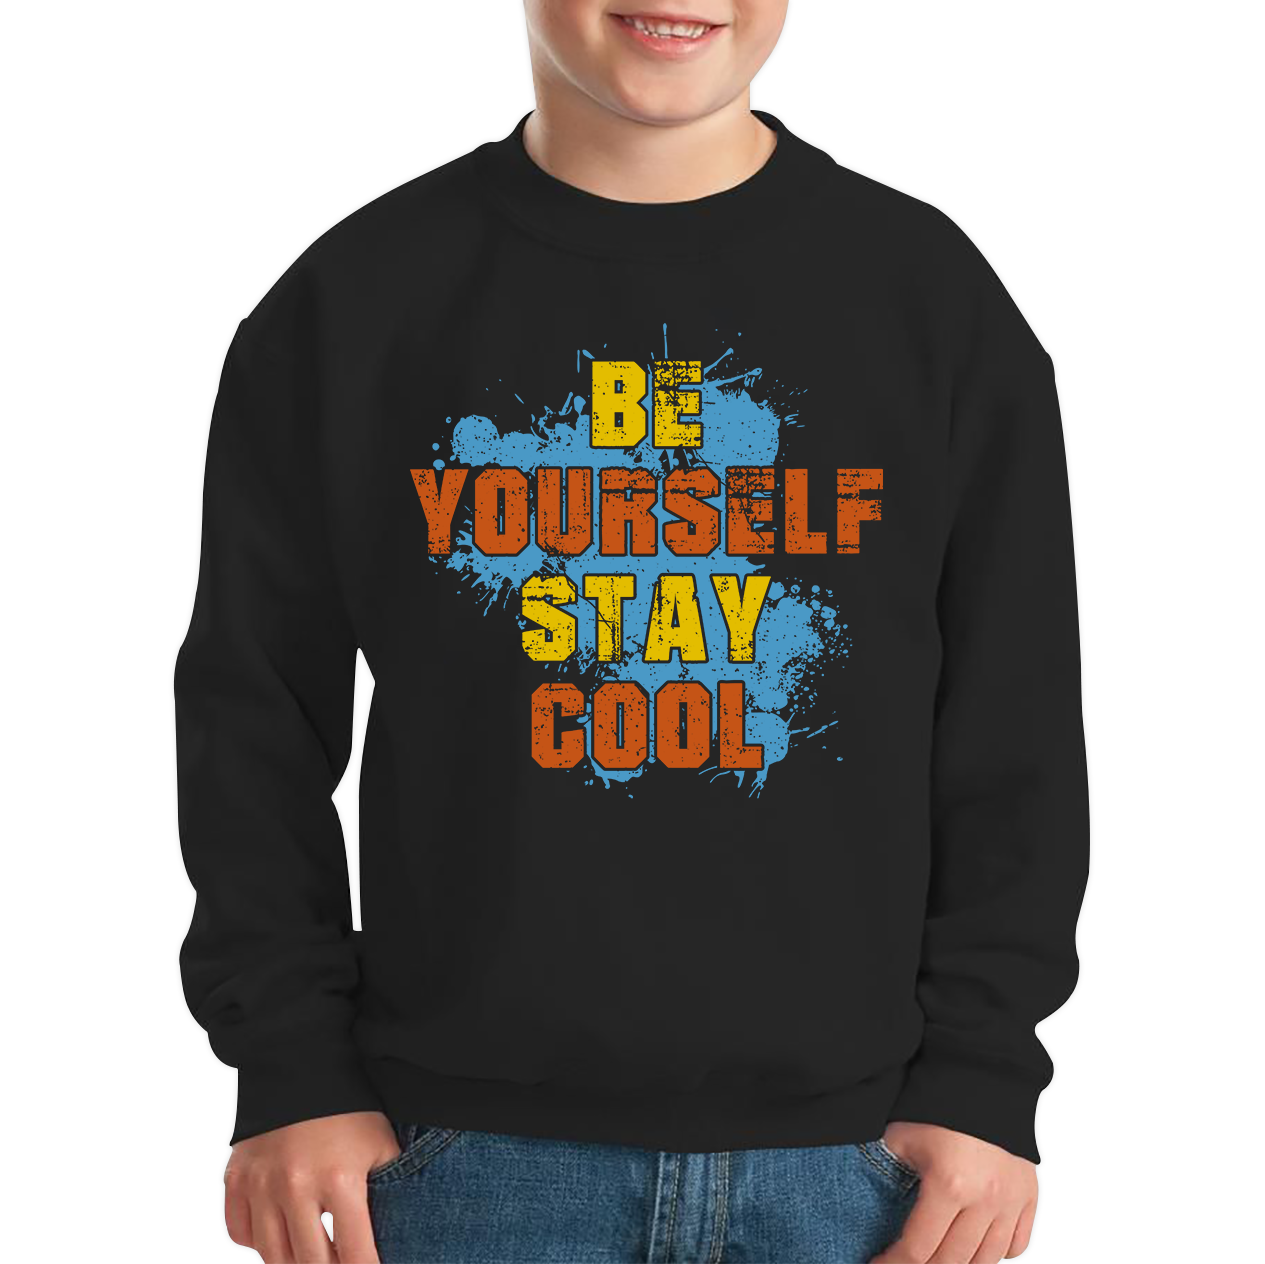 Be Yourself Stay Cool Jumper Inspirational Motivational Quote Kids Sweatshirt